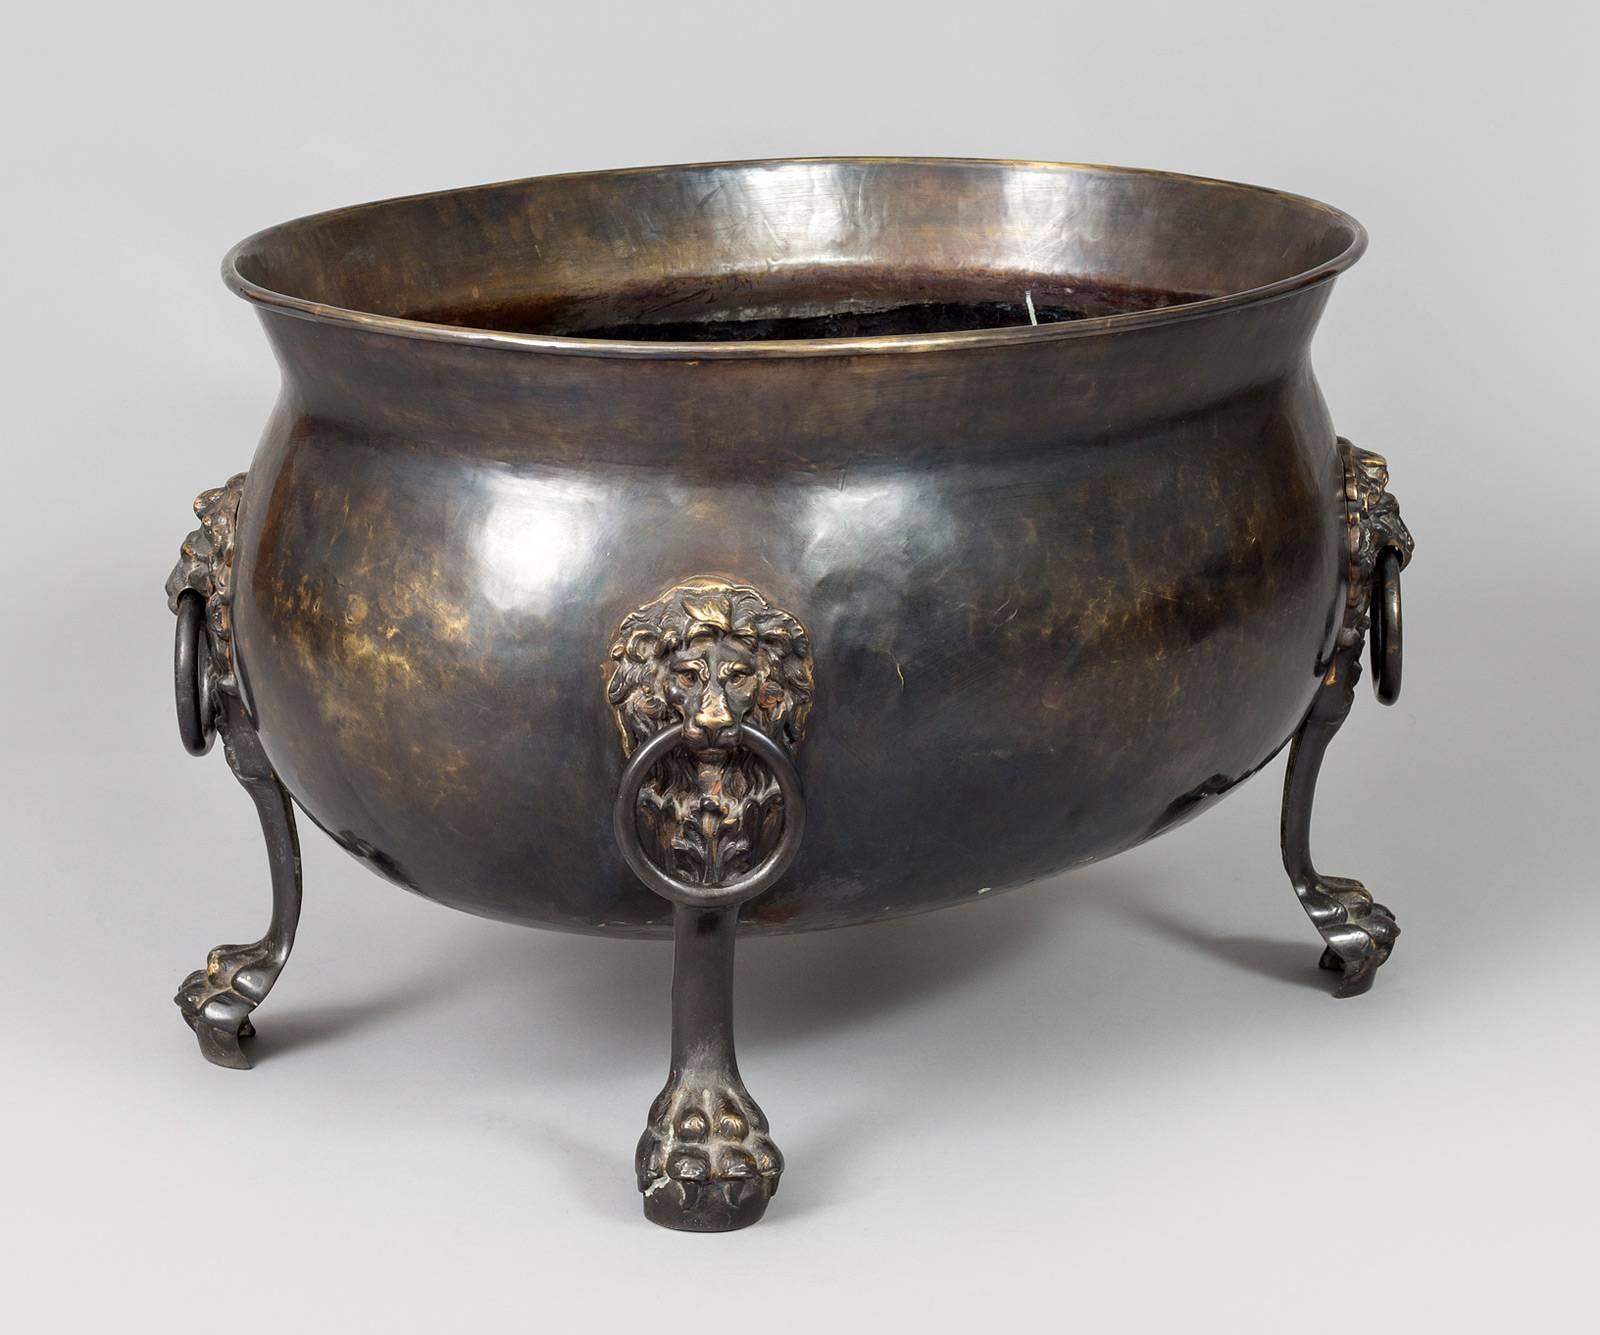 Exceptional large patinated brass oval wine cooler with lion mask and ring handles, mounted on tall lion paw feet. Could also be used at the fireplace for firewood.